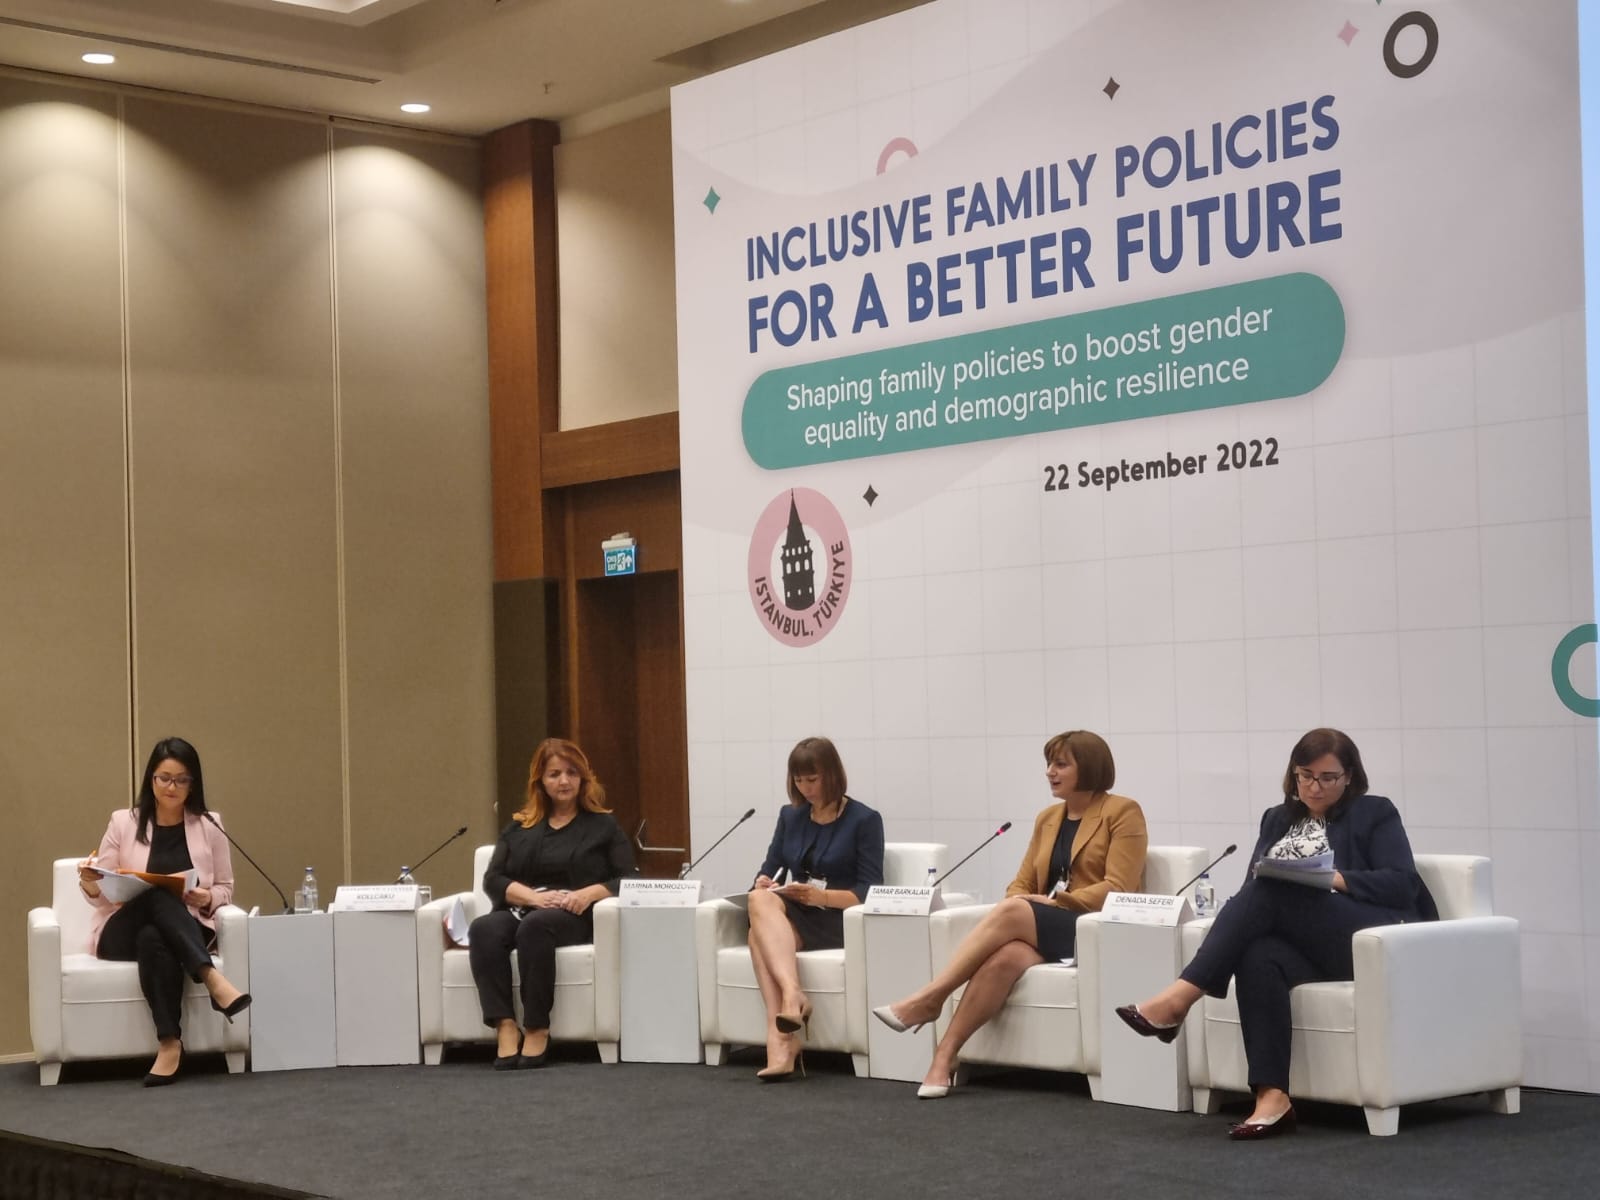 A panel of high-level delegates. All female